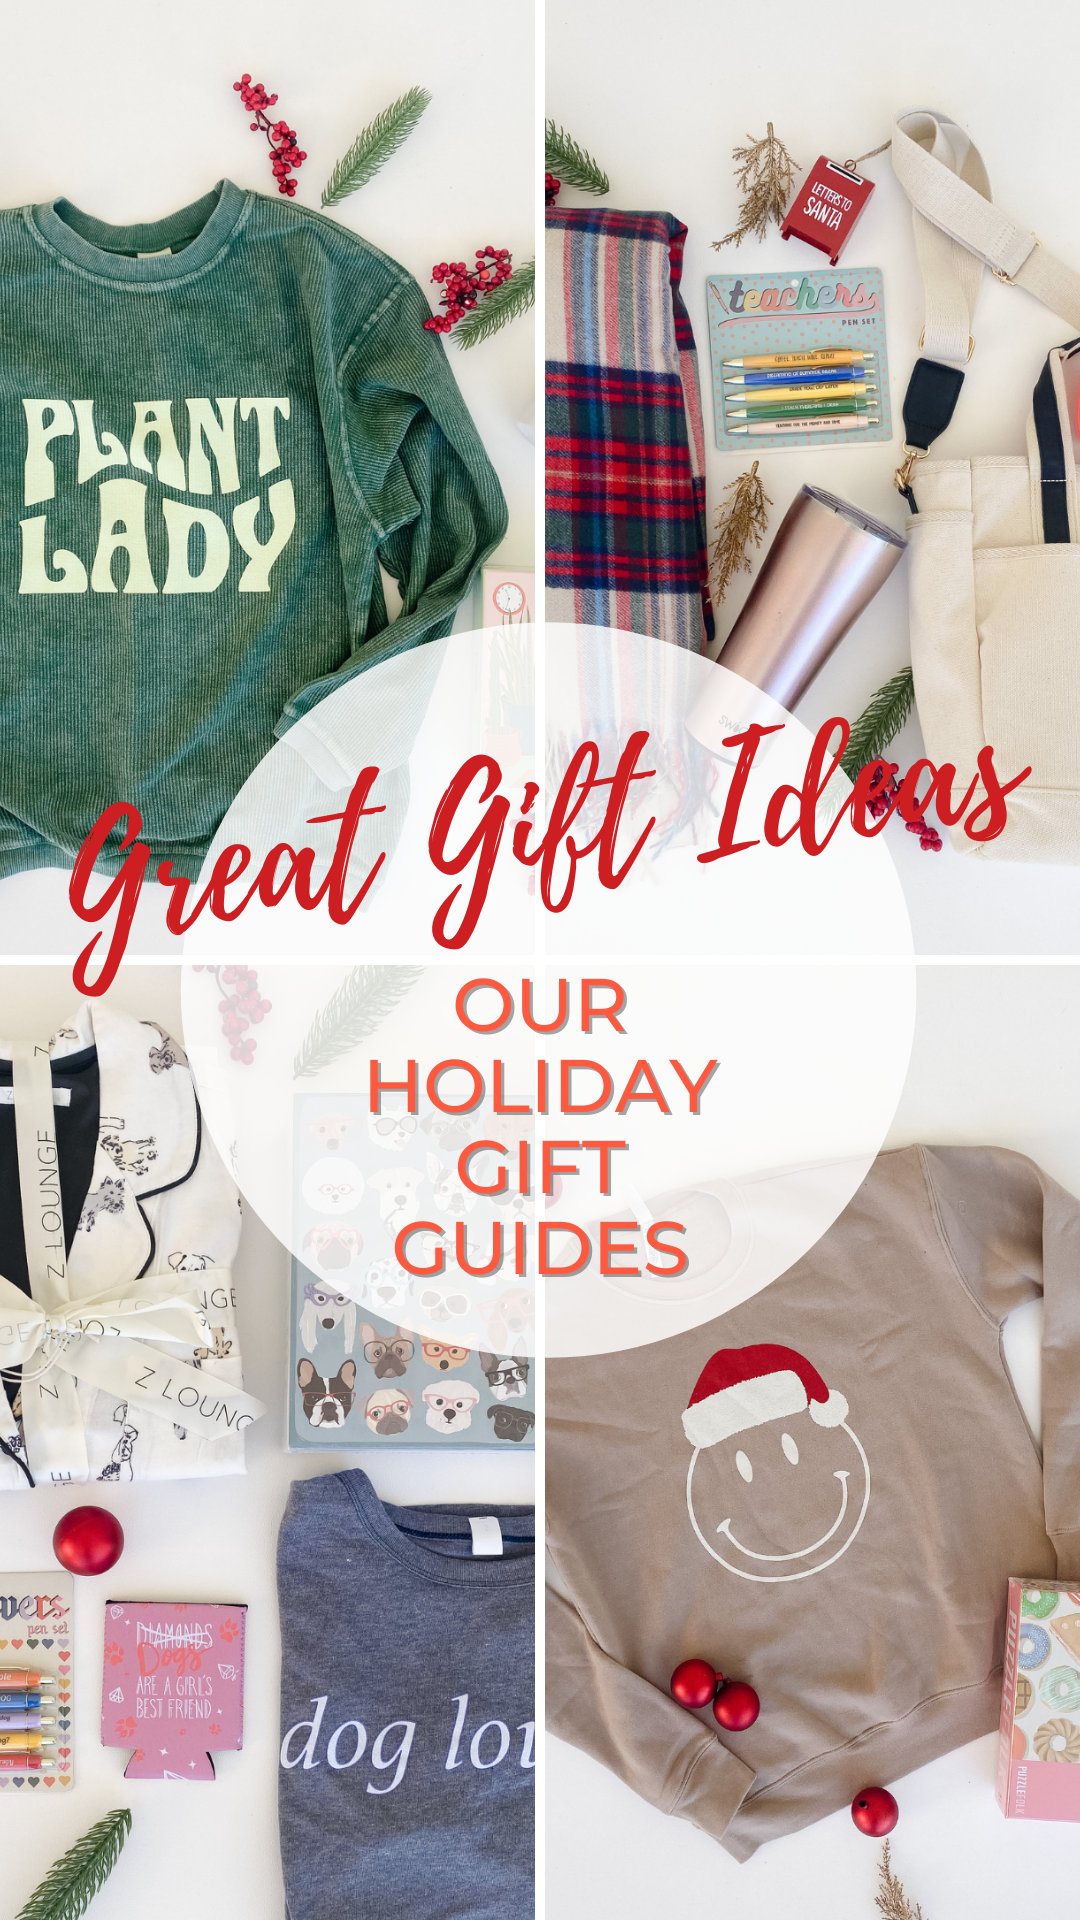 Get Great Gift Ideas with our Holiday Gift Guides